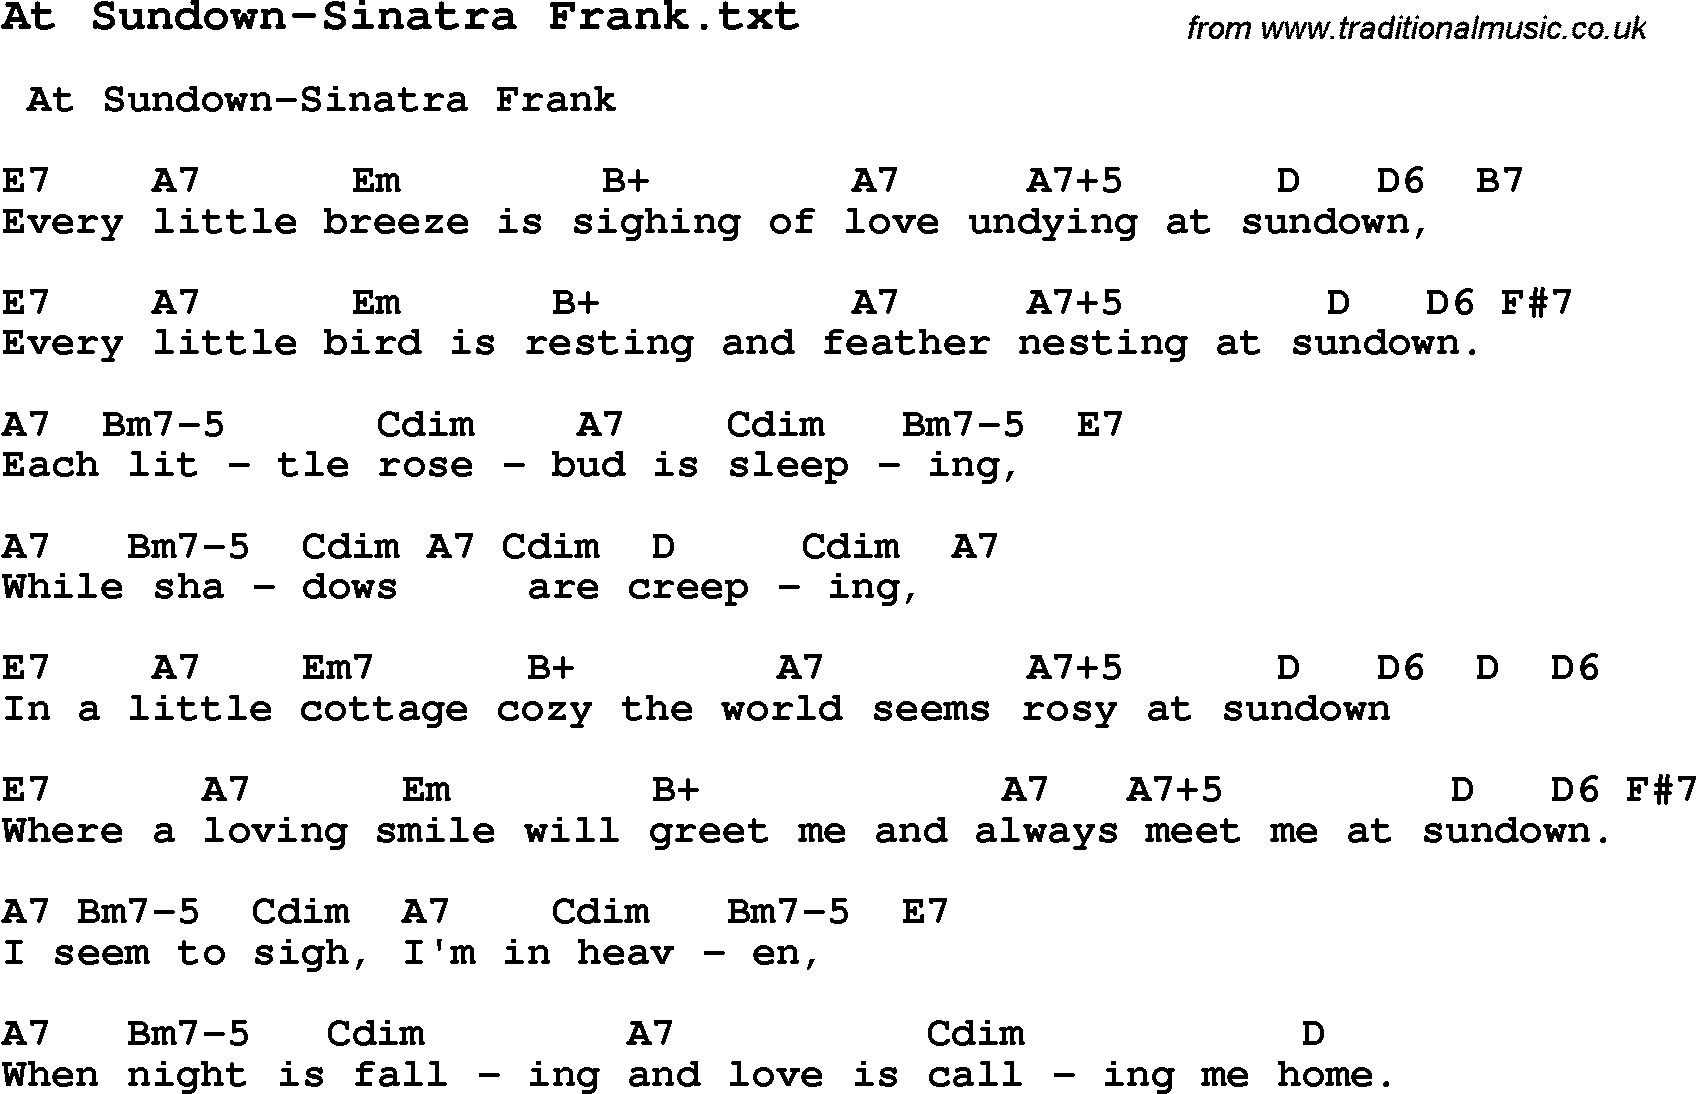 Jazz Song from top bands and vocal artists with chords, tabs and lyrics - At Sundown-Sinatra Frank